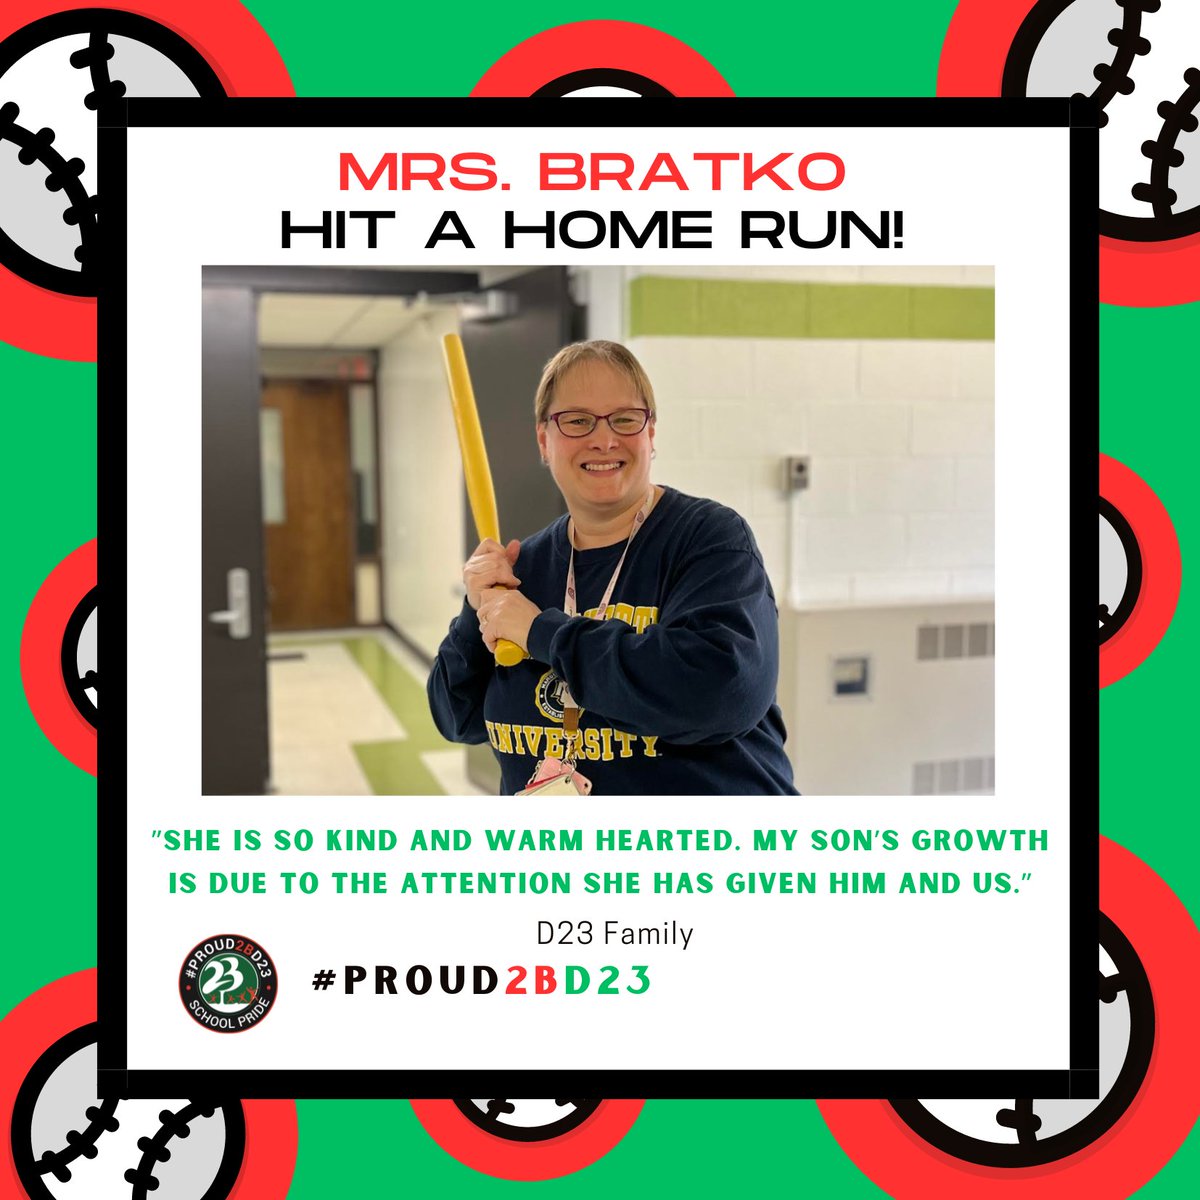 Batter up! The @PHSD23 staff are hitting home runs for our students, families, and colleagues! Which staff member will round the bases next? Stay tuned! #PROUD2BD23! ⚾️ @Dangelaccio @CraigCurtisD23 @AmyMcP_BAMMP @D23Eisenhower @D23Ross @D23Sullivan @D23MacArthur